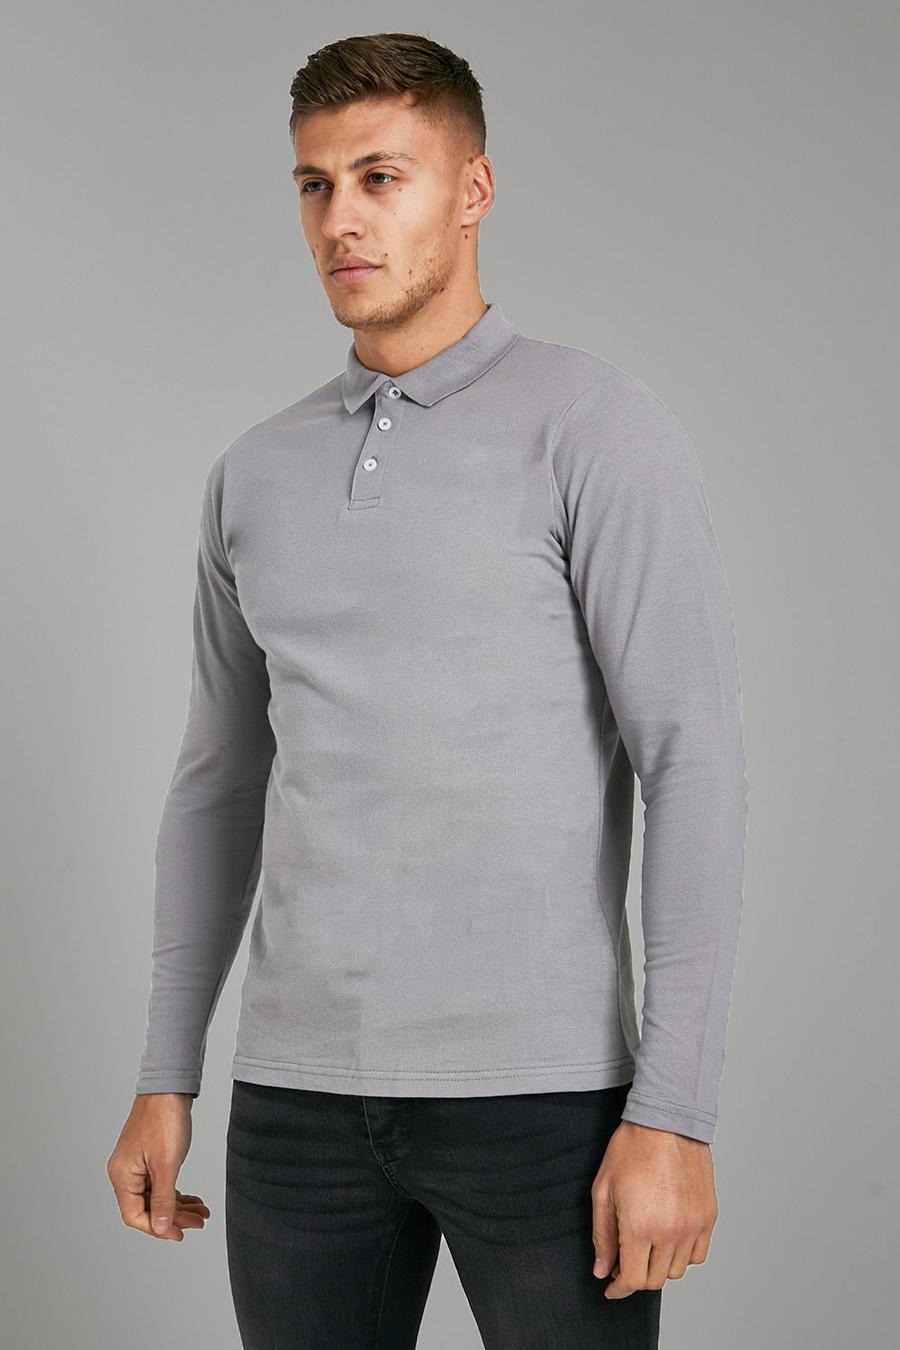 Charcoal grey Slim Fit Long Sleeve Pique Polo